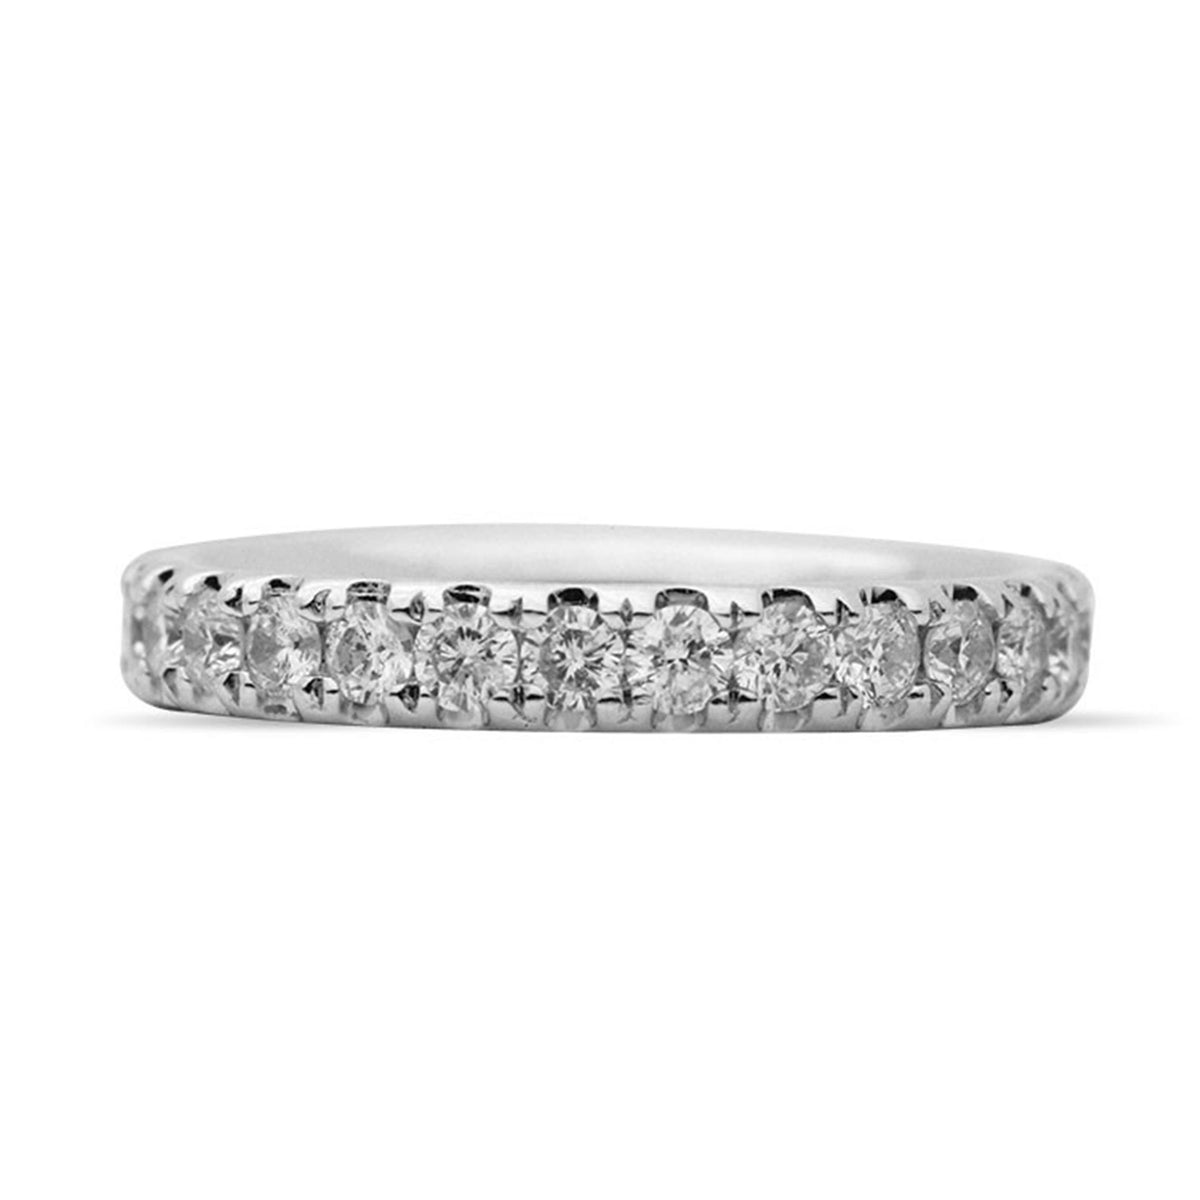 18K White Gold Eternity Band with 2.60cttw Round Natural Diamonds - Size 5